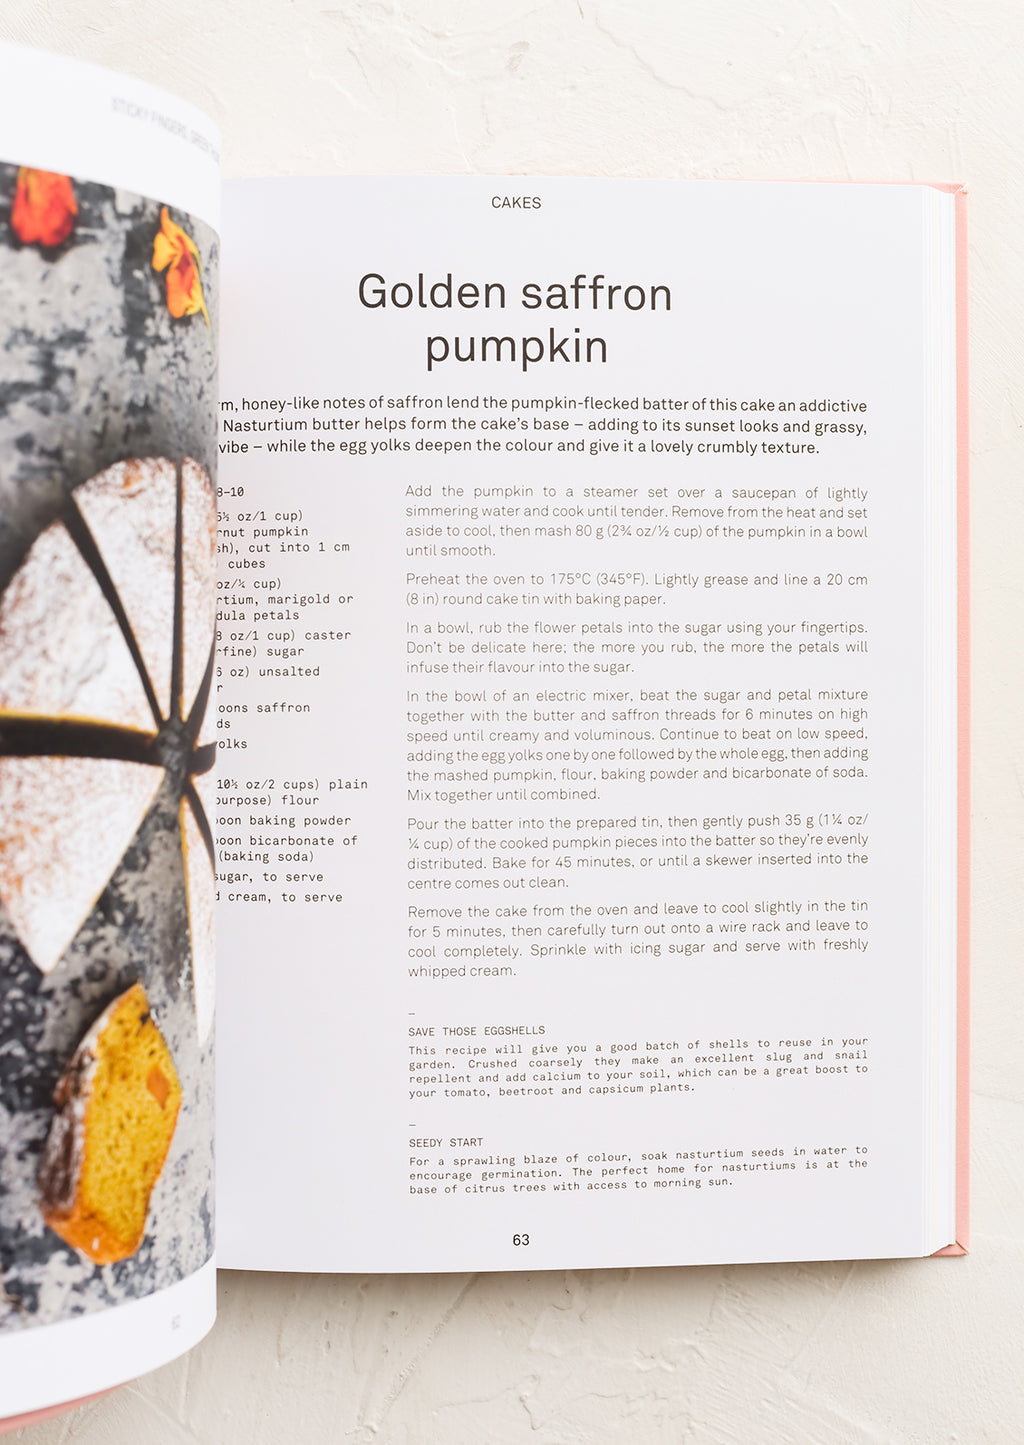 3: A cookbook open to a page with recipe for Golden saffron pumpkin cake.